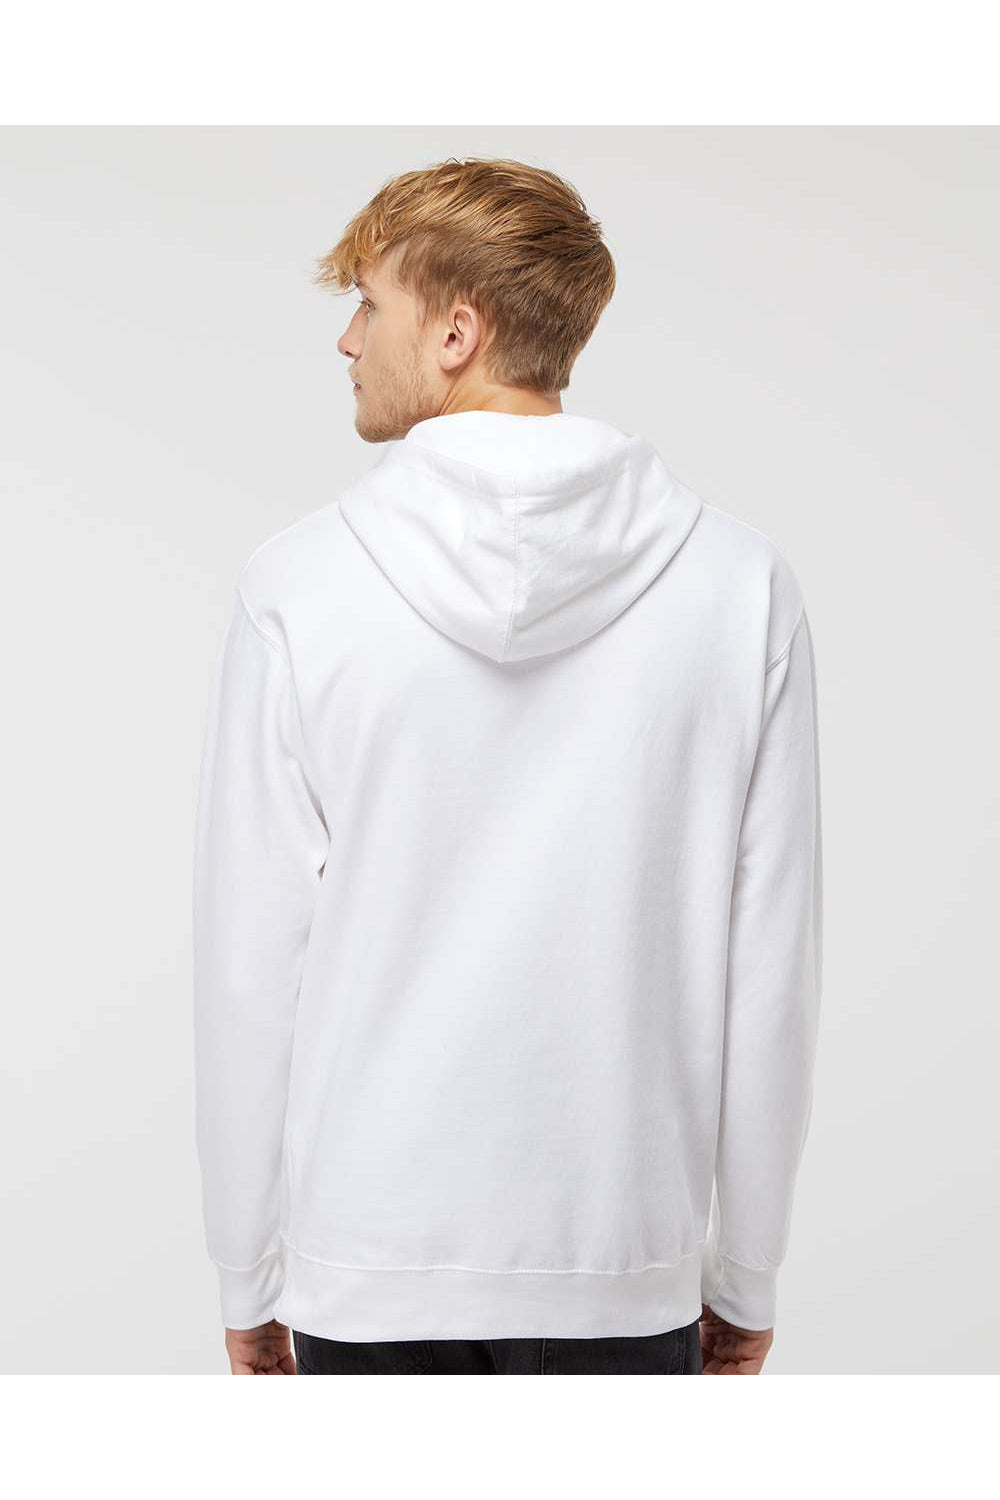 Independent Trading Co. SS4500 Mens Hooded Sweatshirt Hoodie White Model Back